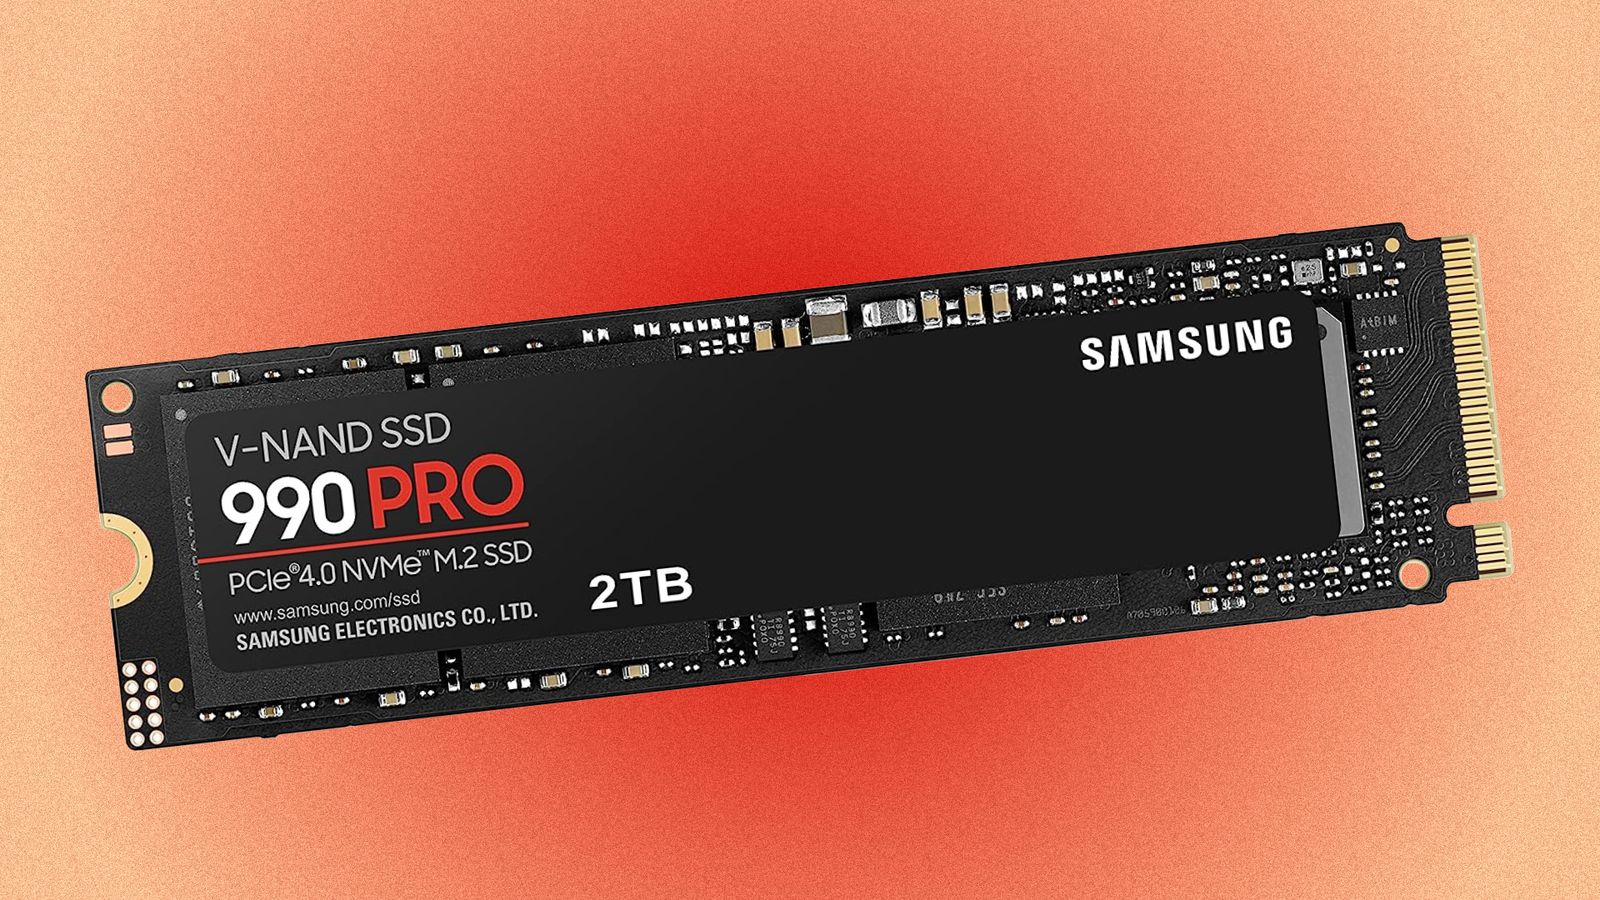 A Samsung 990 Pro NVMe SSD against a red and yellow background